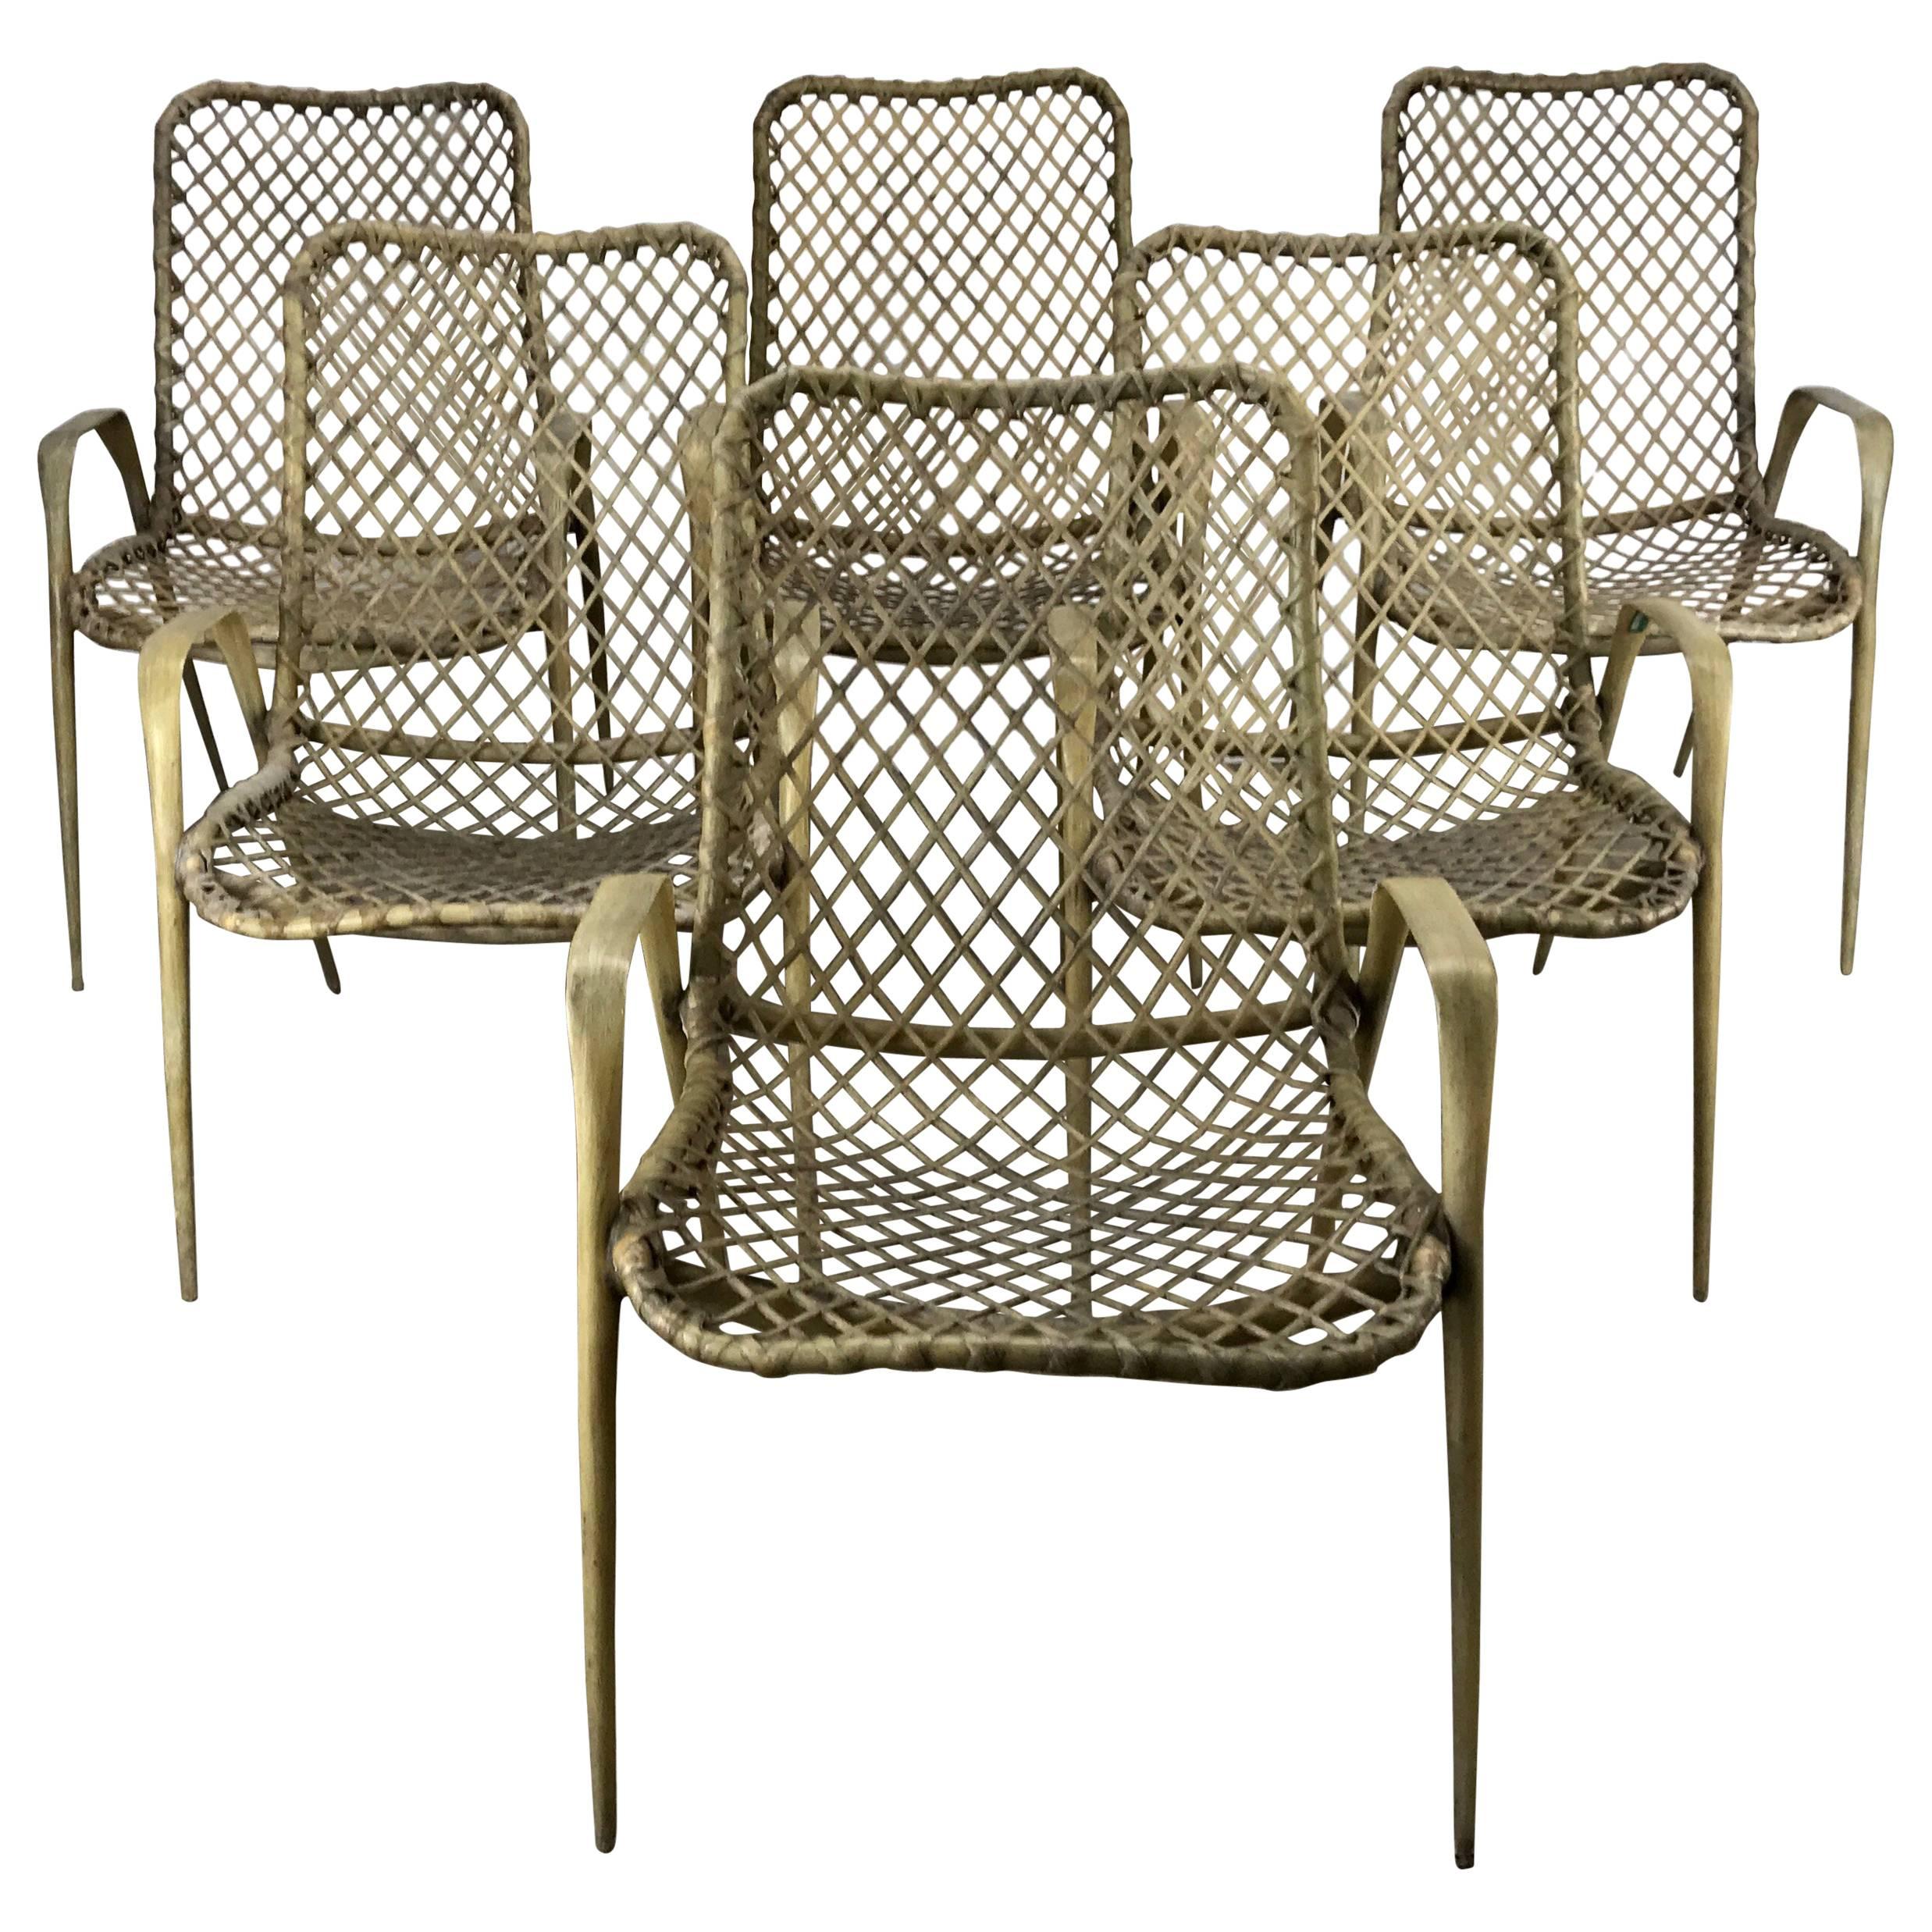 Set of Six Resin String Chairs, Modernist Indoor / Outdoor by Troy Sunshade For Sale